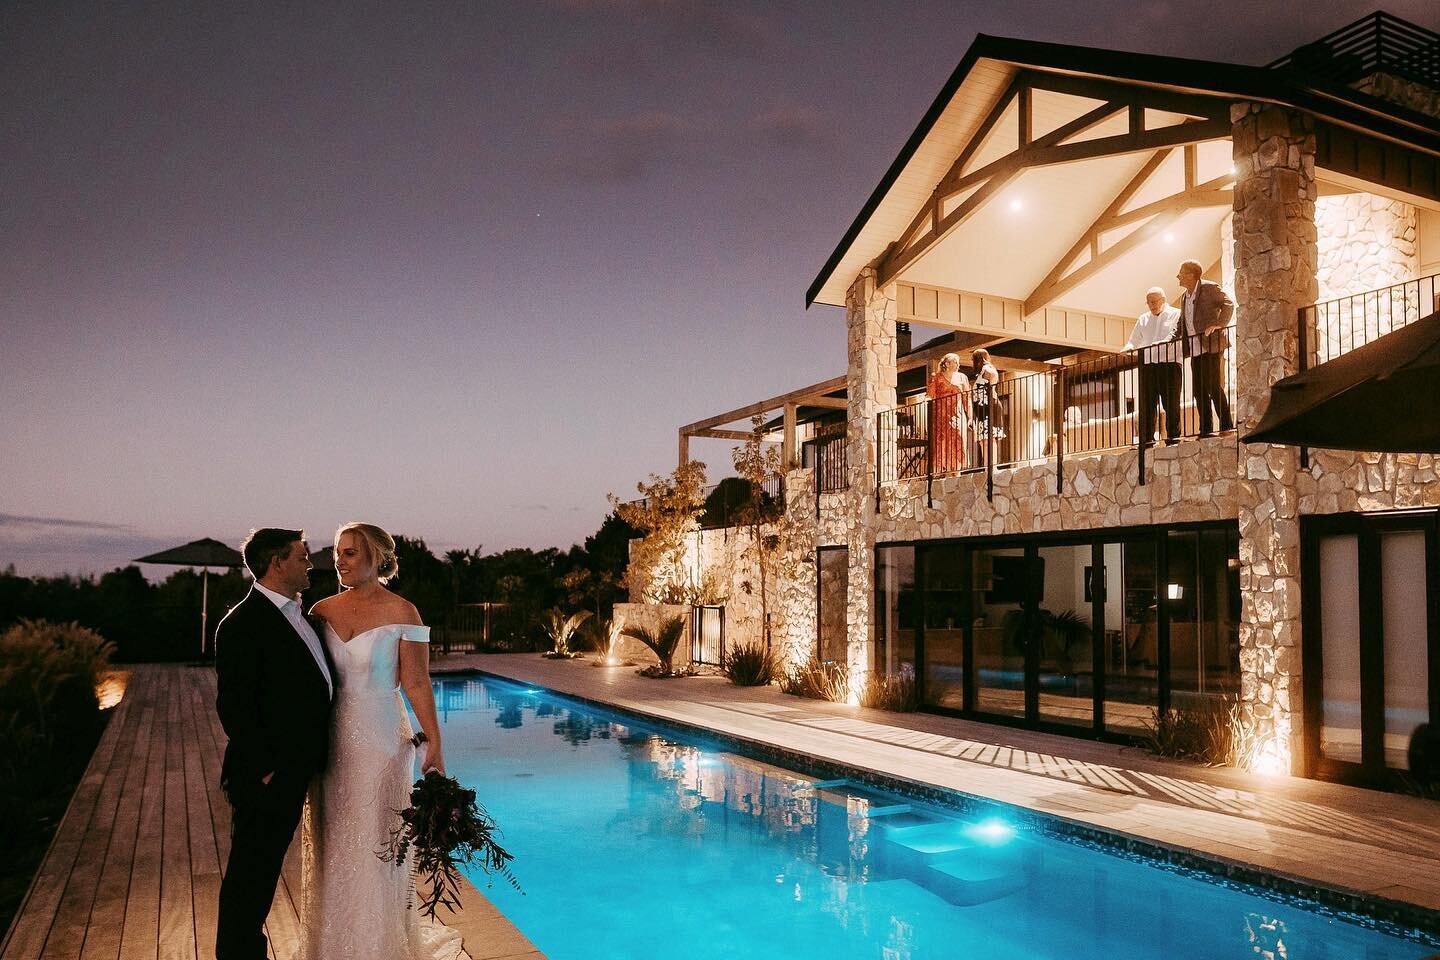 Would you love to celebrate your wedding day under the stars in Te Arai? 🥂 

When we first built Te Arai Lodge, we always envisioned what a stunning wedding venue it would be with our beautiful gardens as a backdrop for the ceremony, celebratory cha